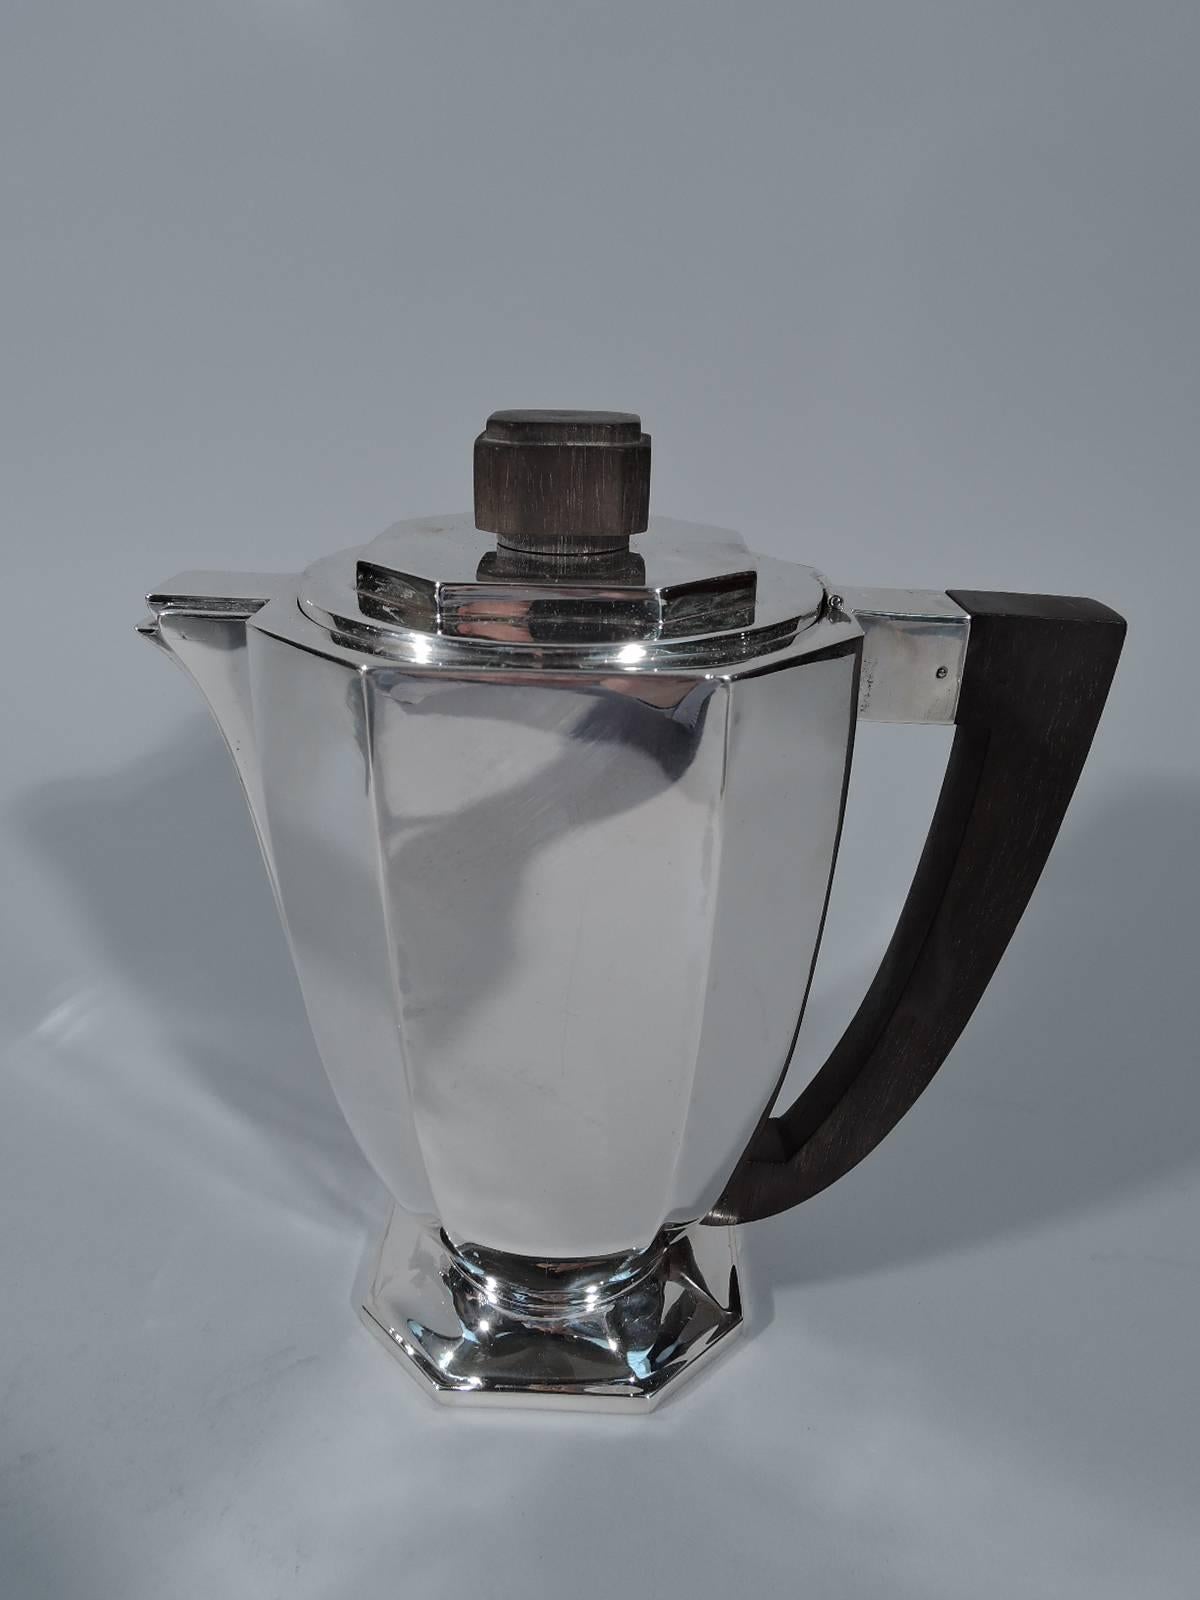 Art Deco 950 silver coffee and tea set, circa 1930. This set comprises coffeepot, teapot, creamer, and sugar. Each: faceted body on faceted foot. All handles ebonized wood as are chamfered block finials. Both pots and sugar have stepped cover with